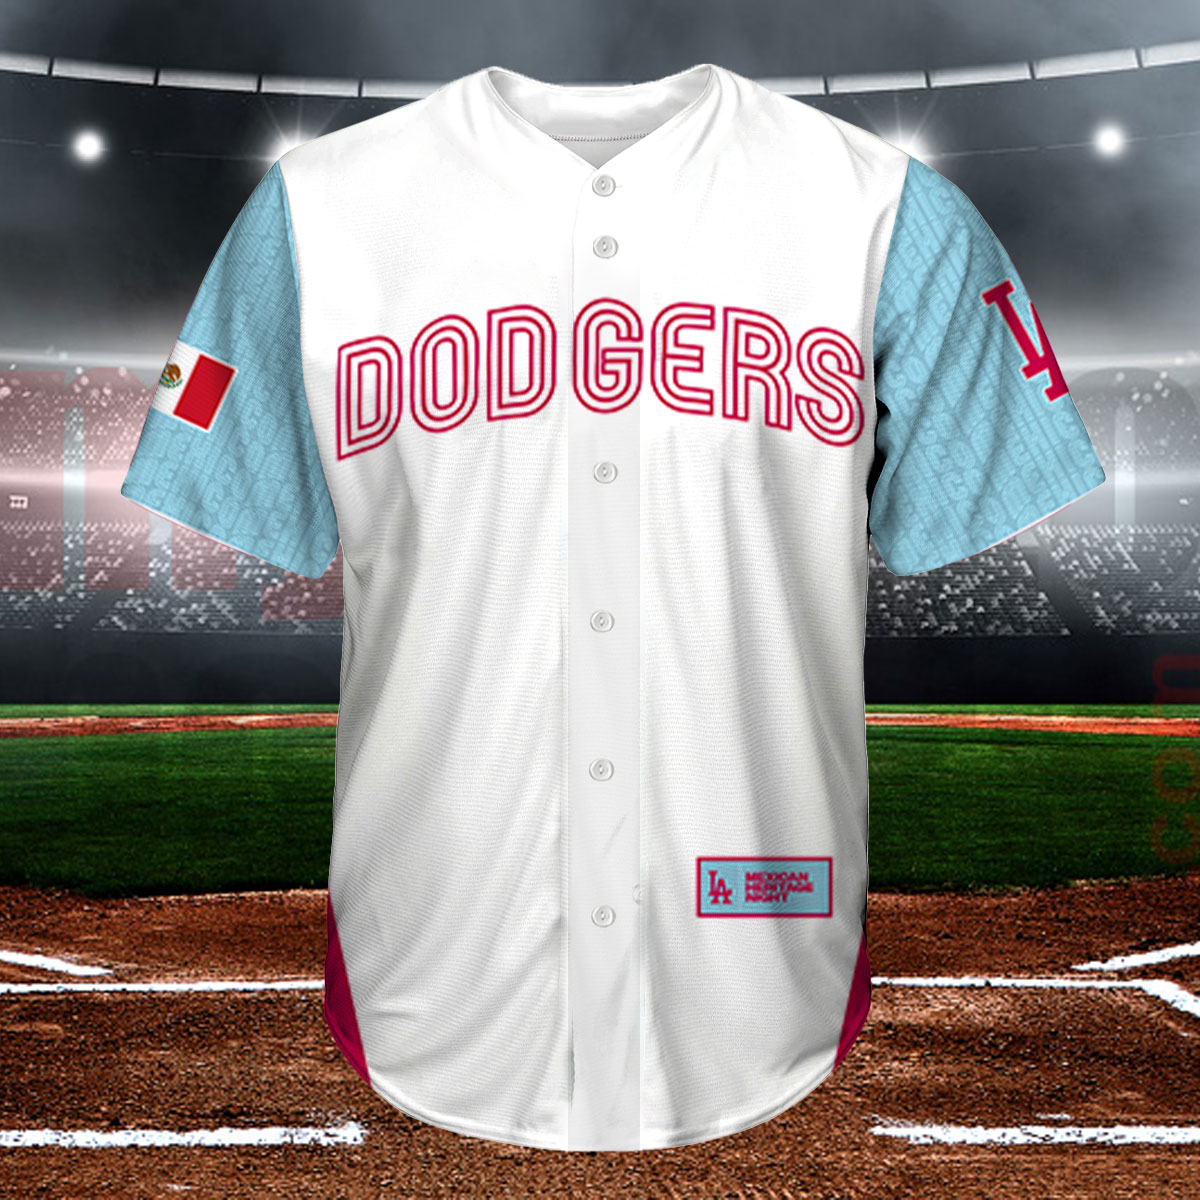 Mexican Heritage Night Dodger Jersey Shirt Giveaway 2023 - Lelemoon